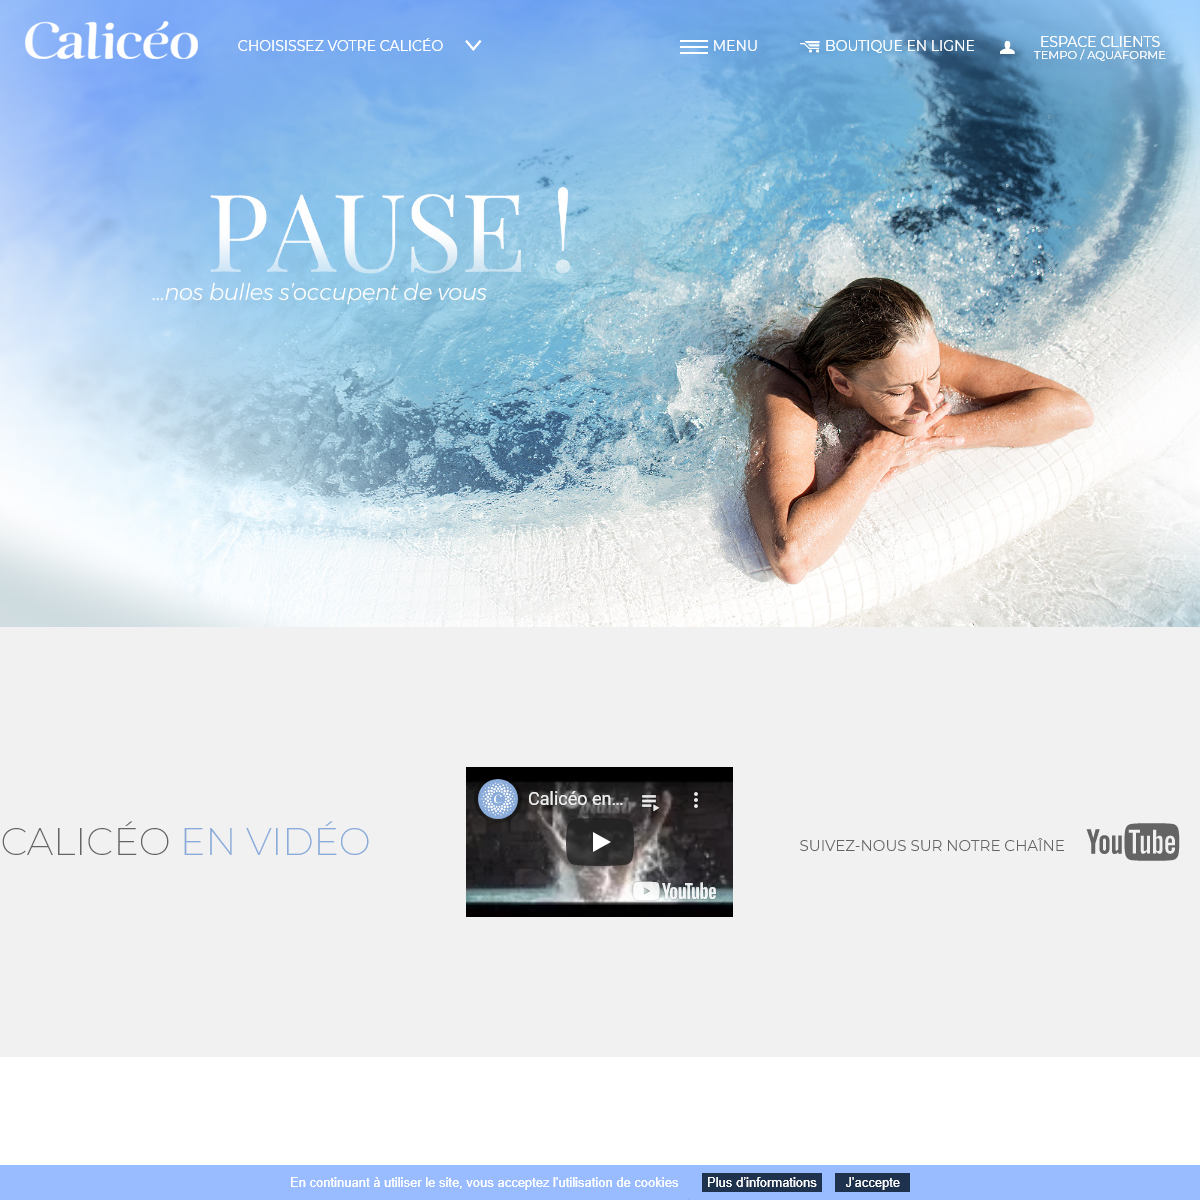 A complete backup of caliceo.com